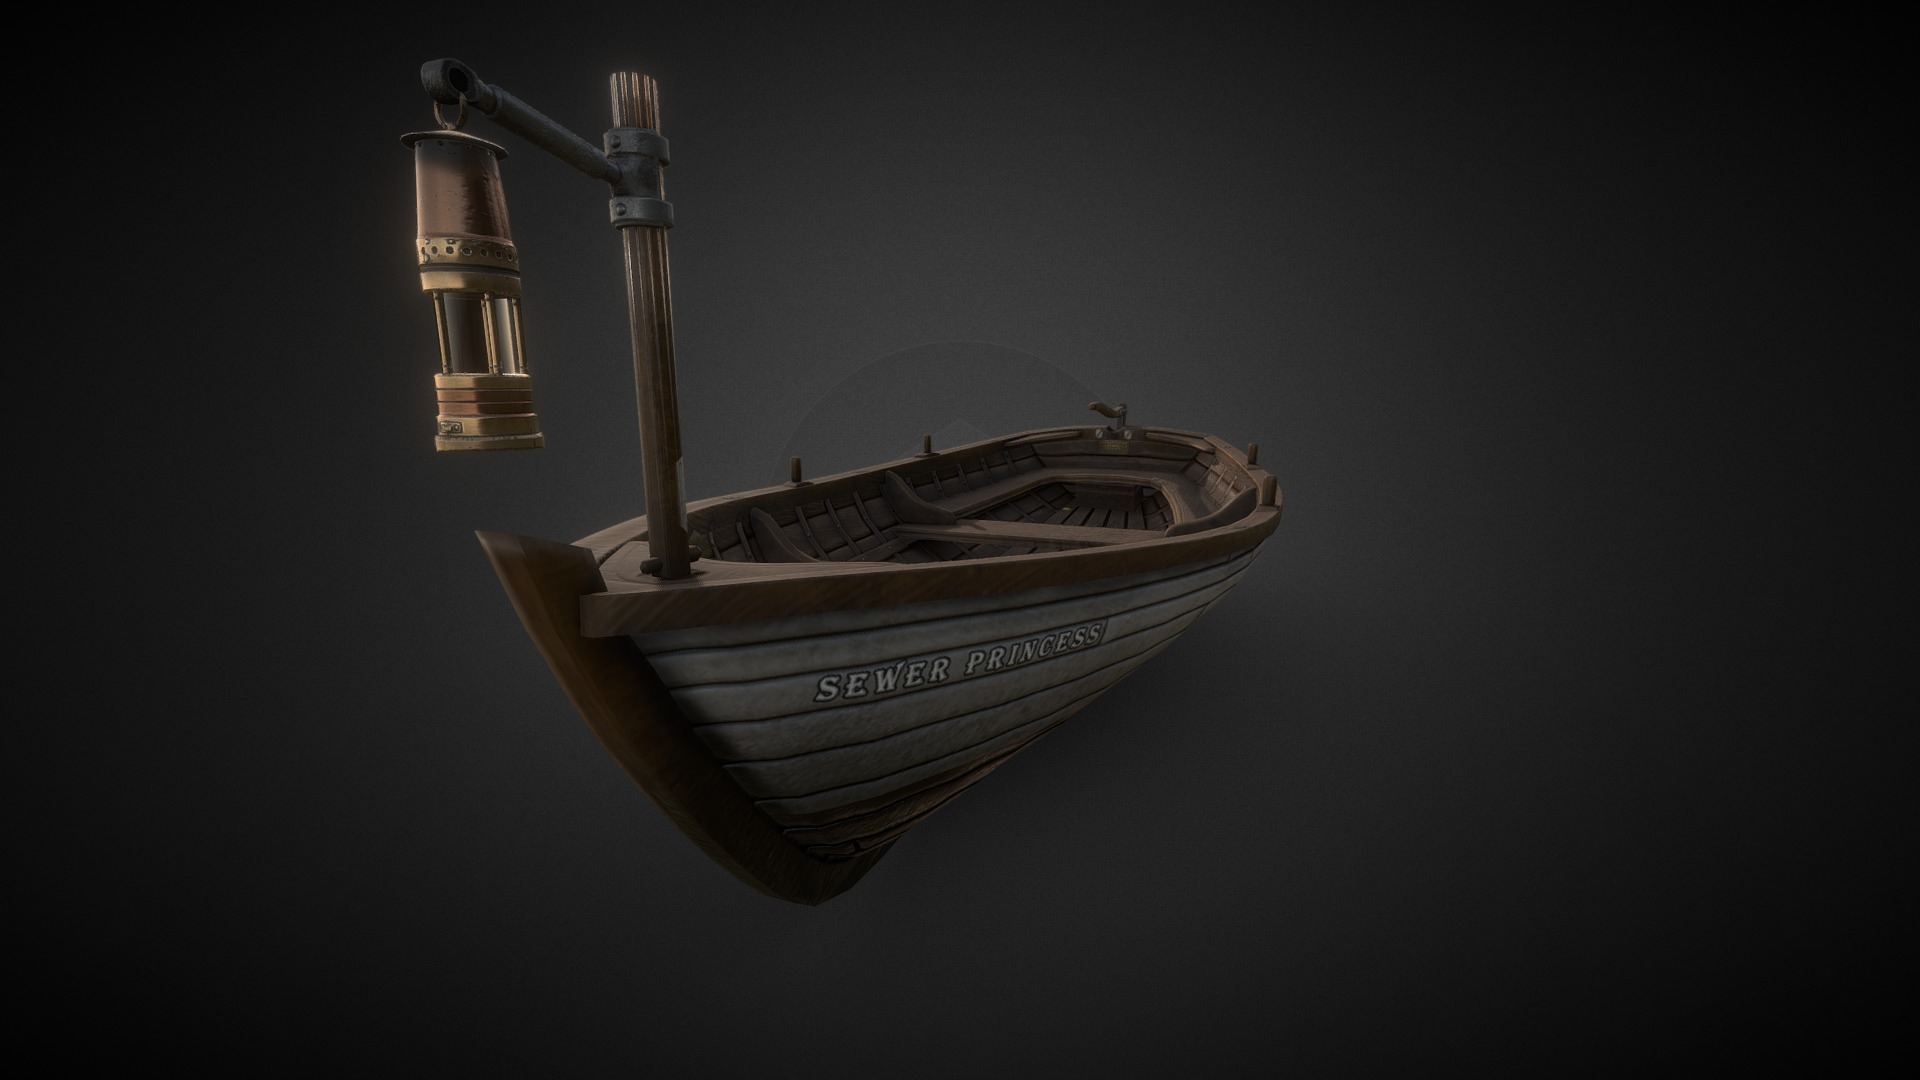 A Victorian wooden row boat, designed and made for a University project, the Infinite runner, set in Victorian London. This piece is part of a larger sewer environment setting and serves as the player character. Modelled in 3DS max and textured in Substance Painter. Budget for this project was 7k tris 3d model